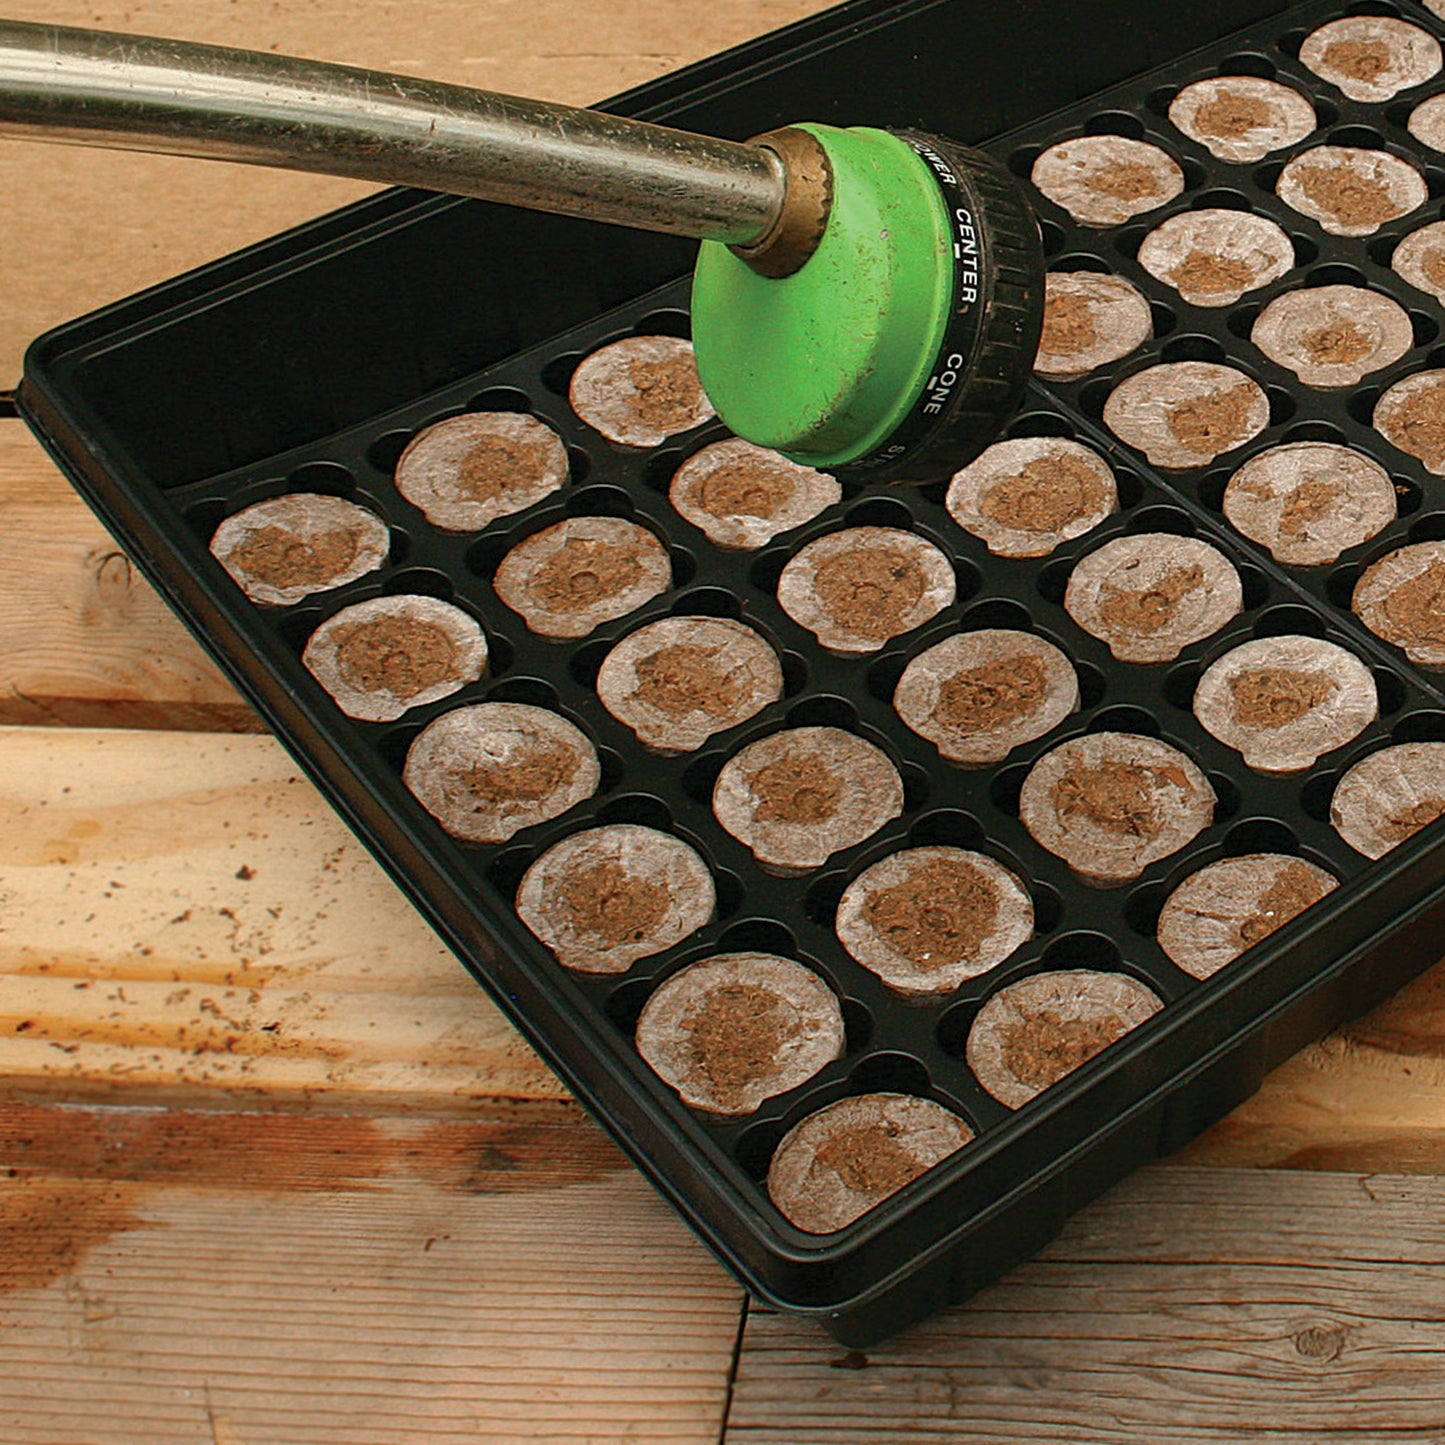 Add water, preferably warm water, to the peat pellets and allow them to expand.